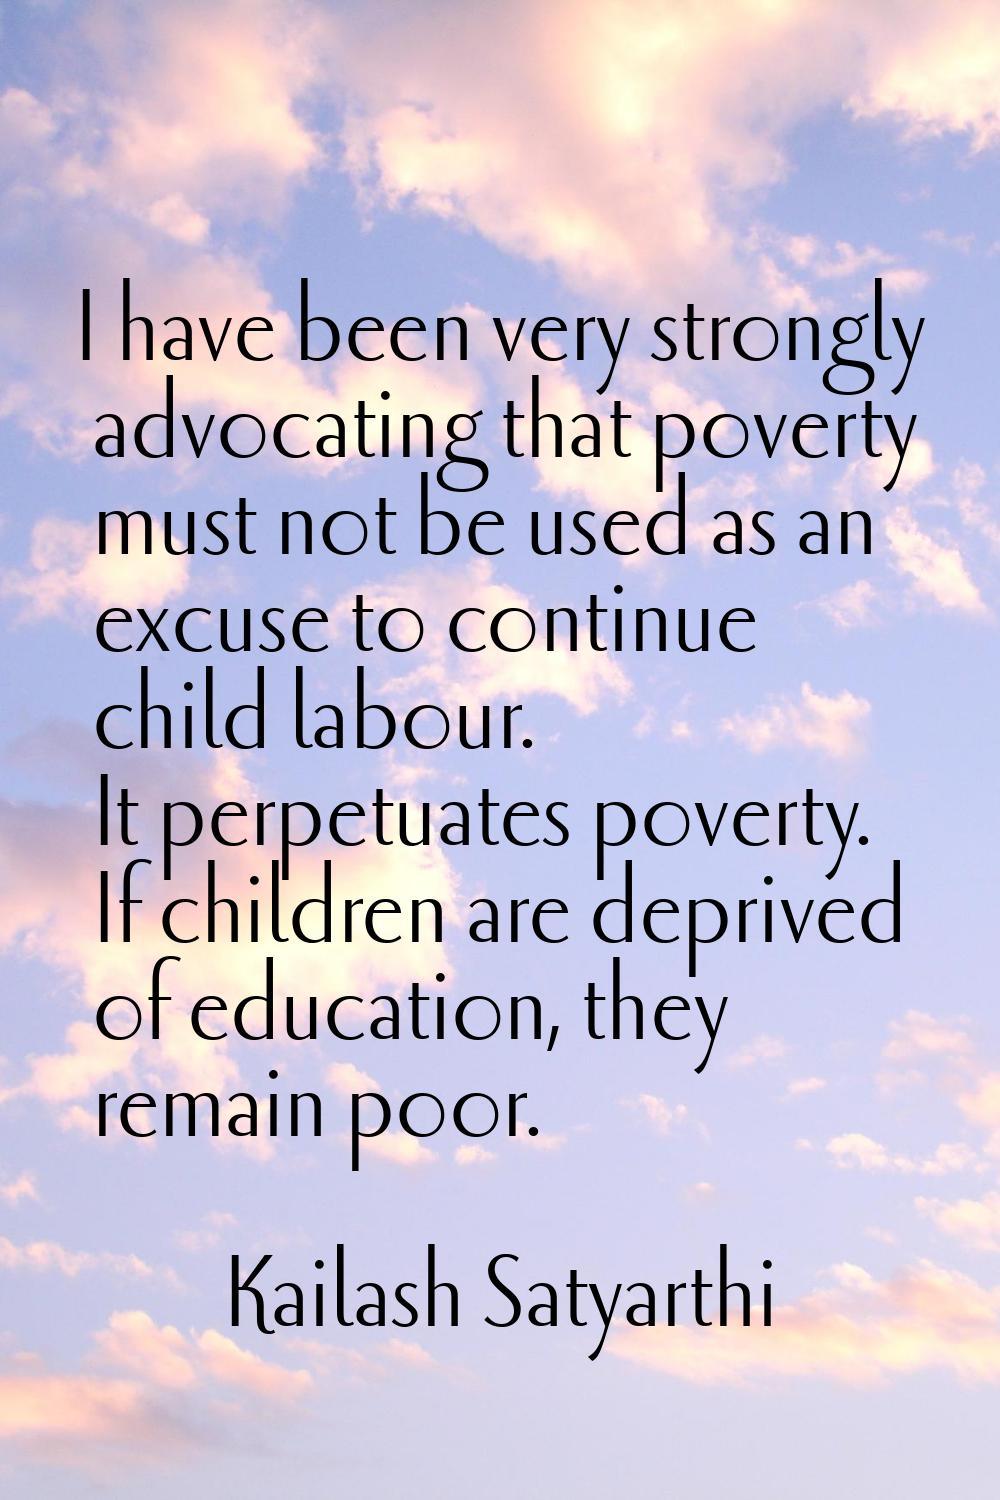 I have been very strongly advocating that poverty must not be used as an excuse to continue child l